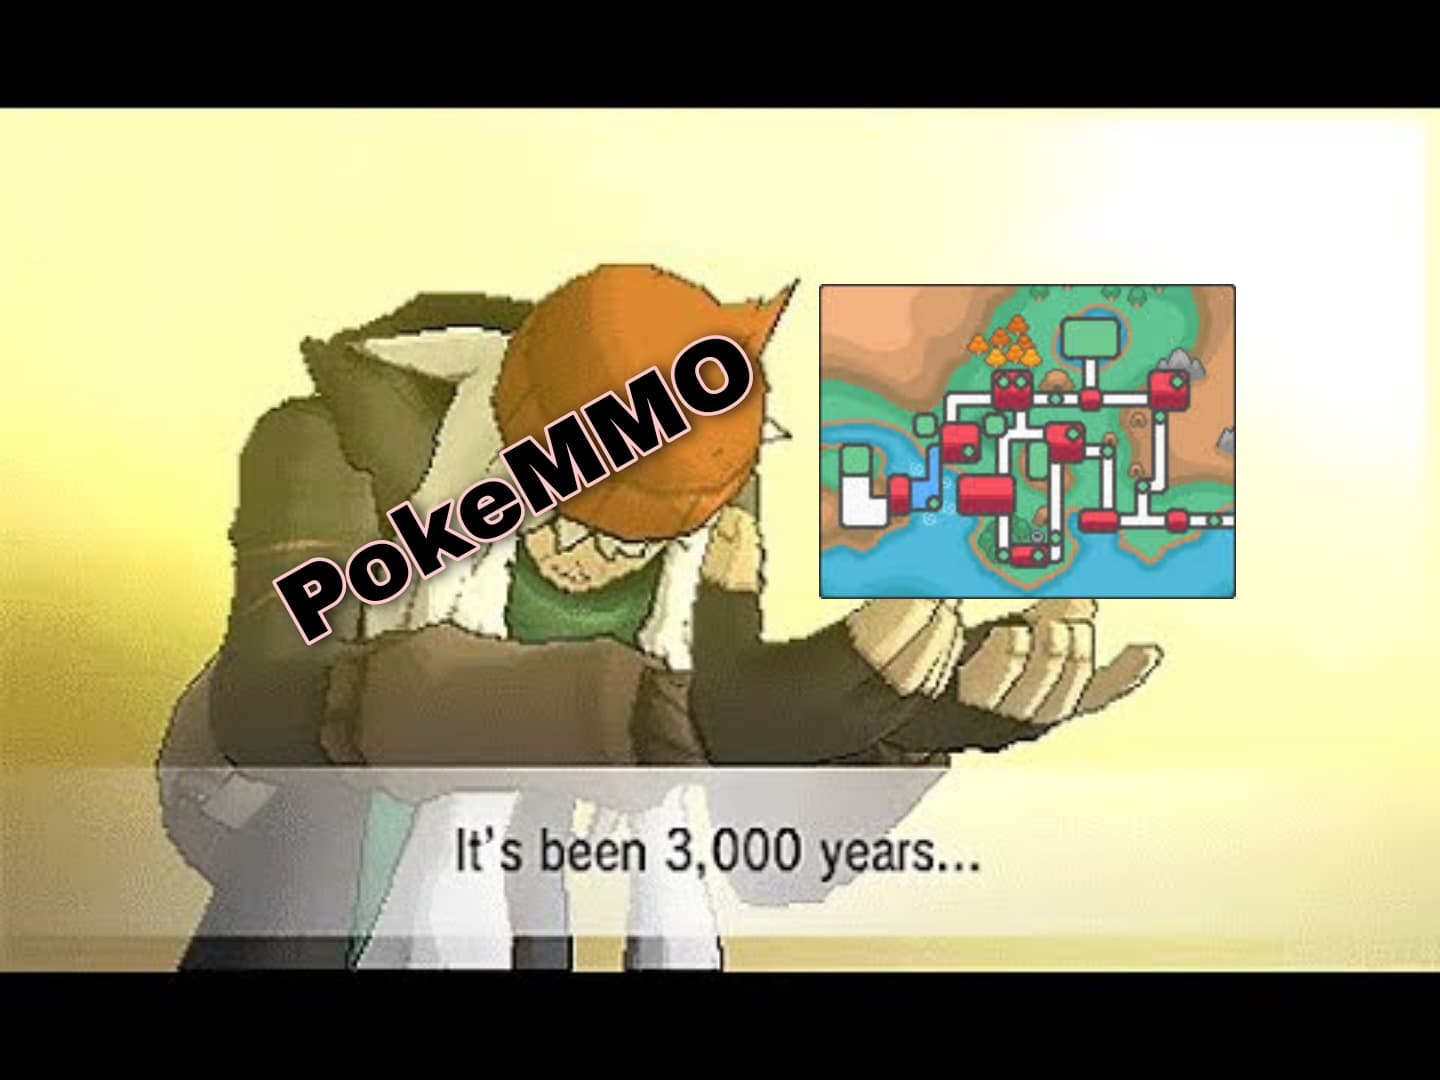 PokeMMO in phone - General Discussion - PokeMMO